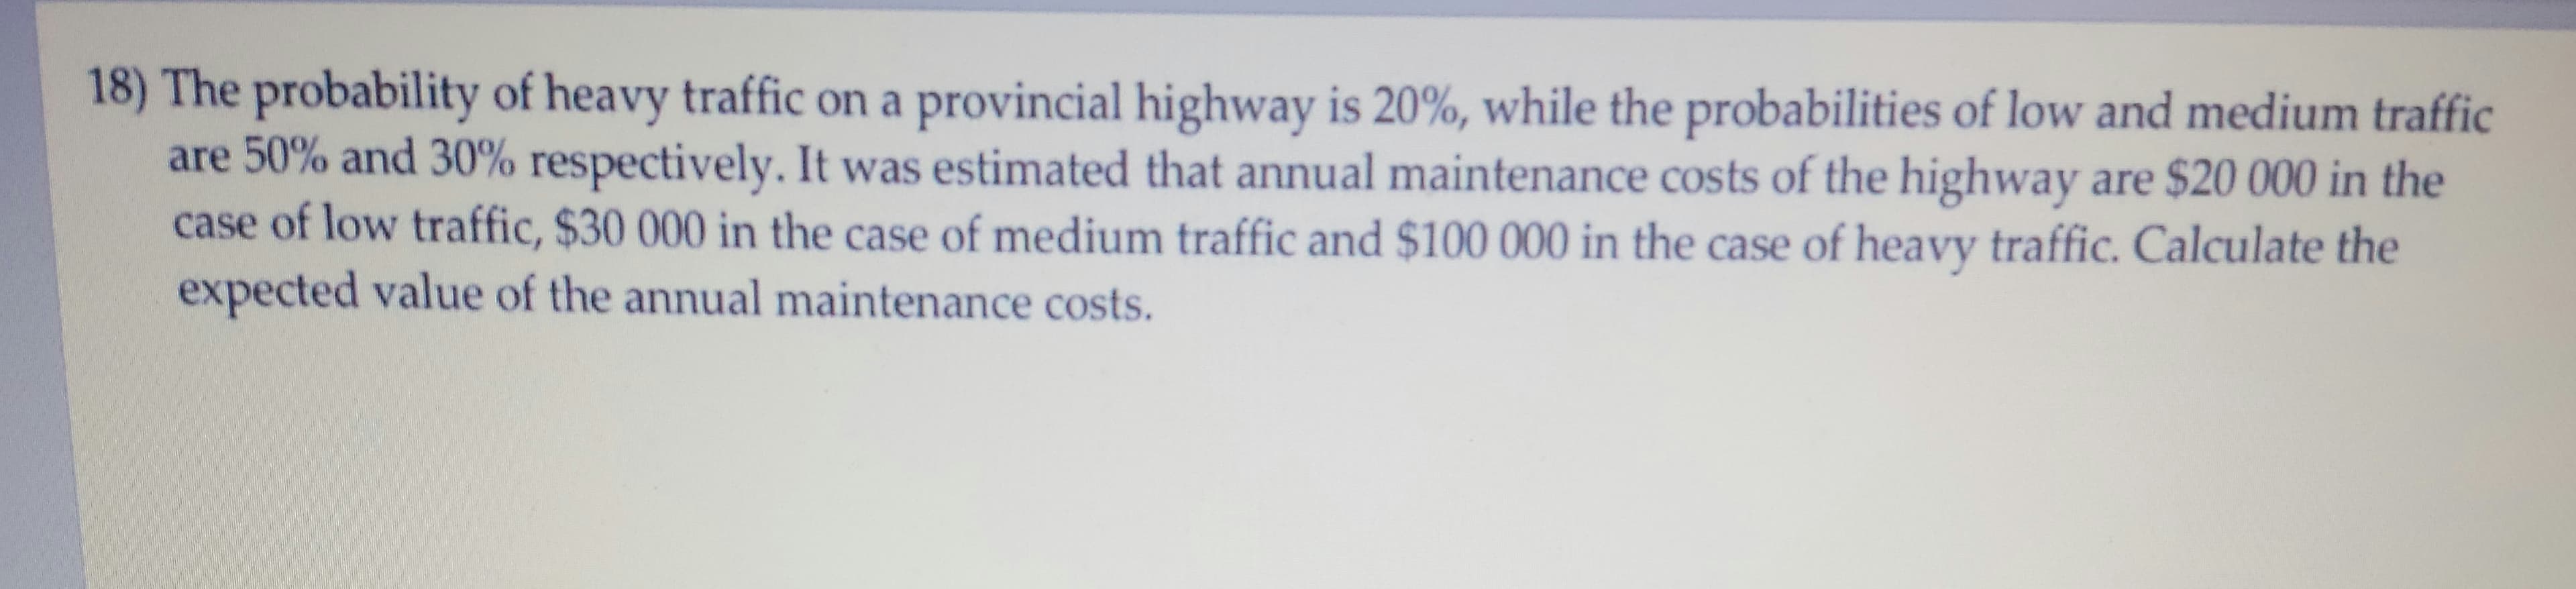 18) The probability of heavy traffic on a provincial highway is 20%, while the probabilities of low and medium traffic
are 50% and 30% respectively. It was estimated that annual maintenance costs of the highway are $20 000 in the
case of low traffic, $30 000 in the case of medium traffic and $100 000 in the case of heavy traffic. Calculate the
expected value of the annual maintenance costs.
